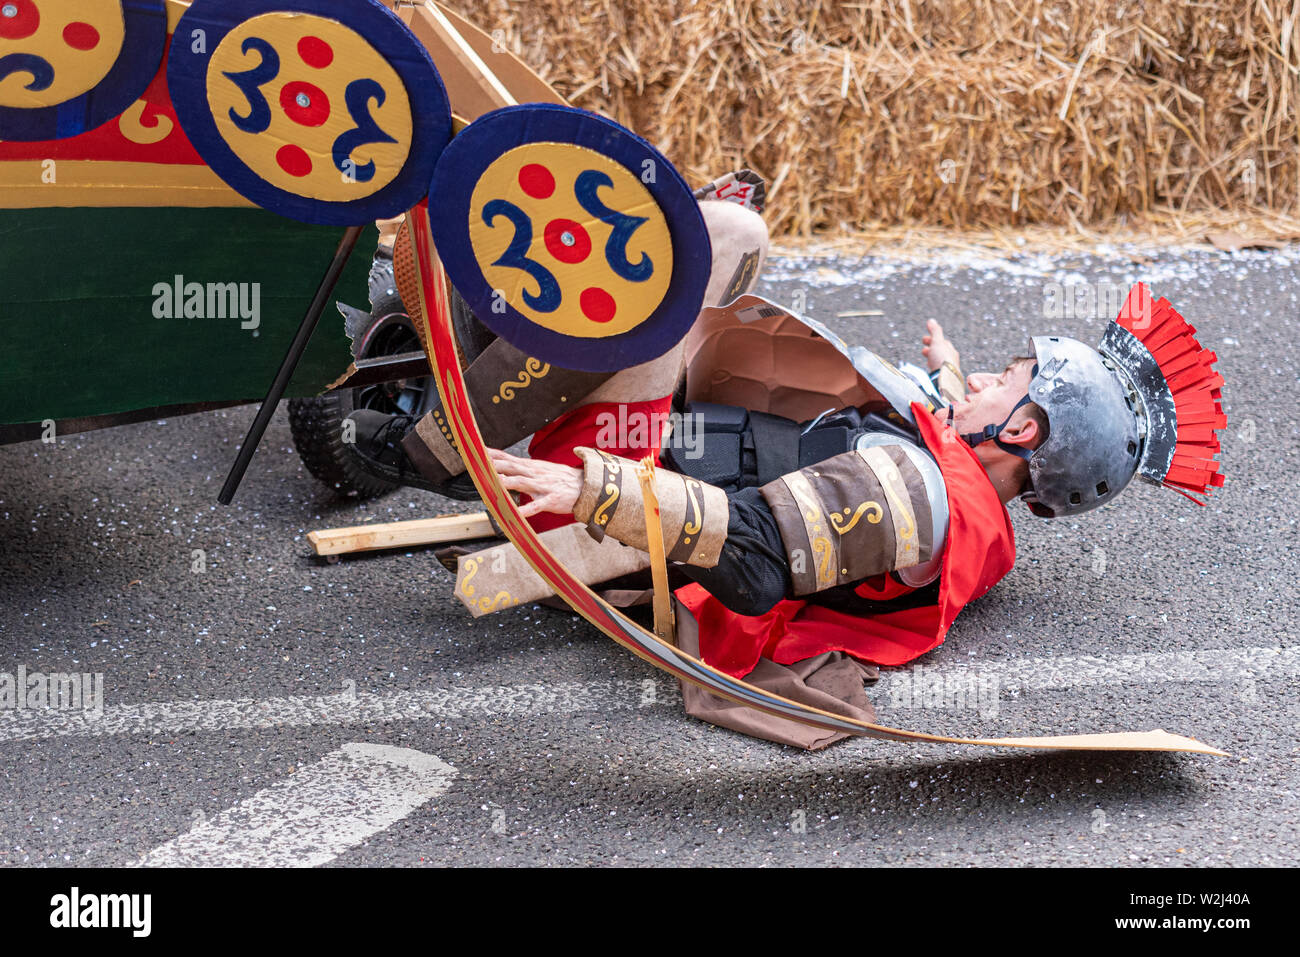 Emperor Barbus Bacterius and the Nautilus competing in the Red Bull Soapbox Race 2019 at Alexandra Park, London, UK. Rider falling out after crash Stock Photo